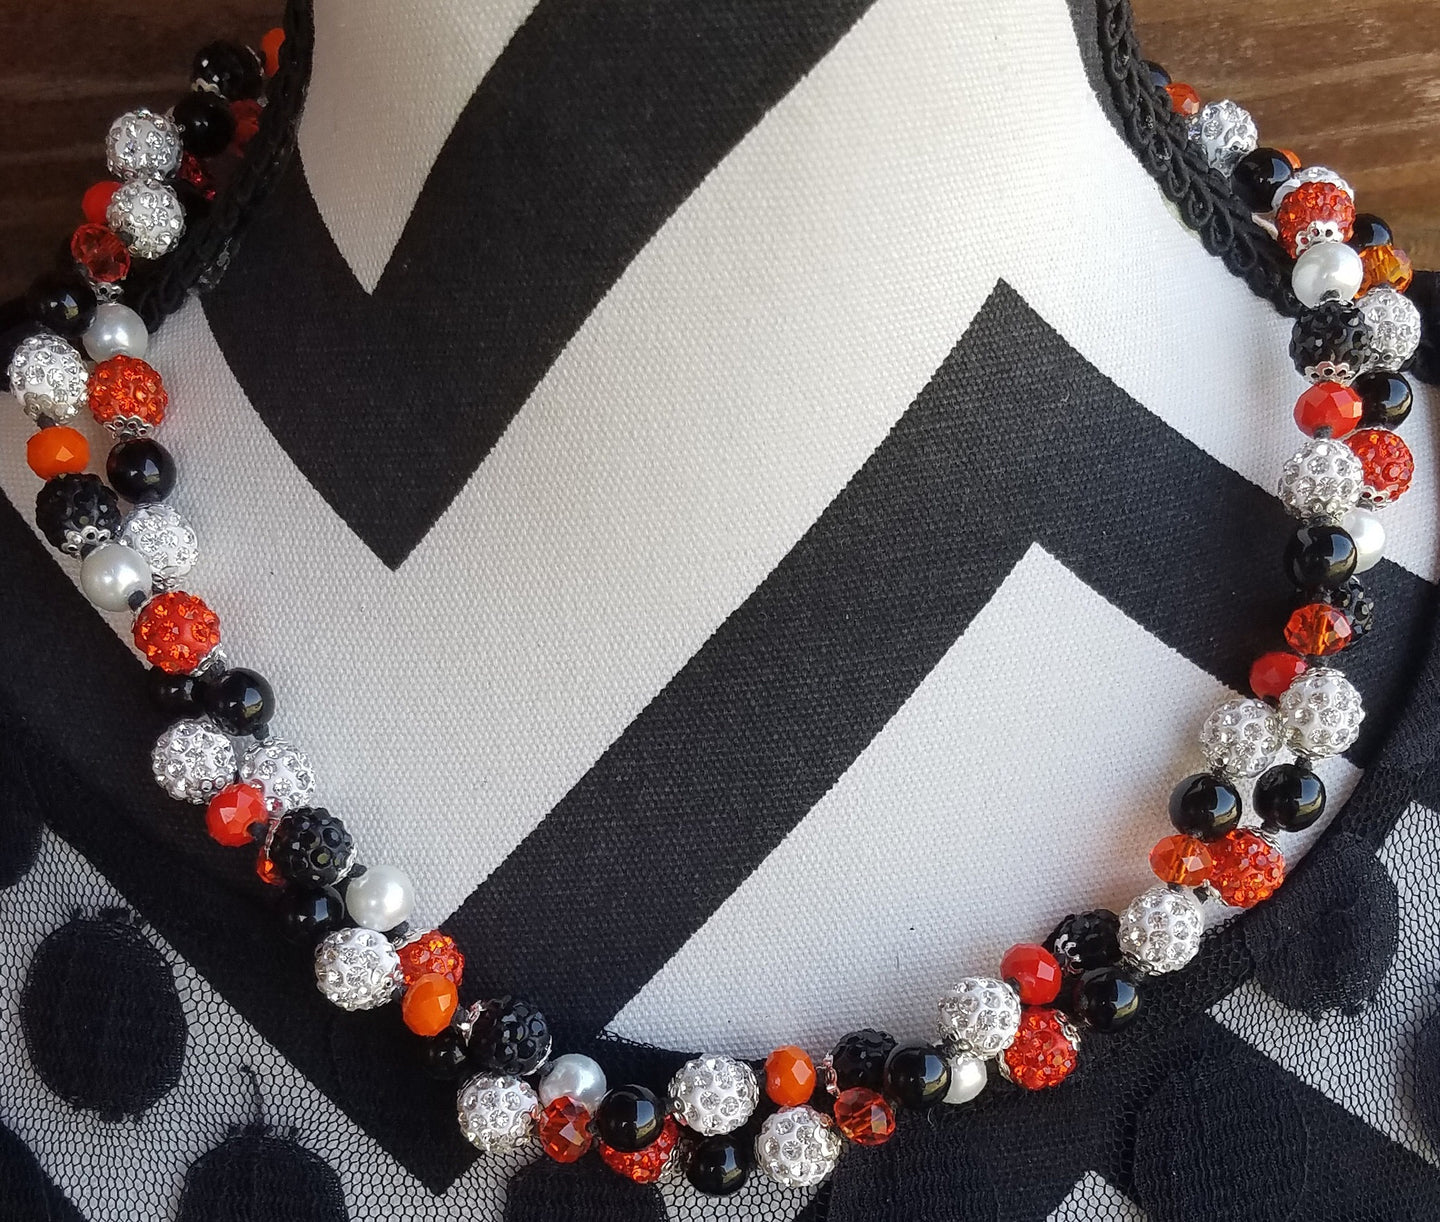 Sparkly Orange and Black Pearl Necklace